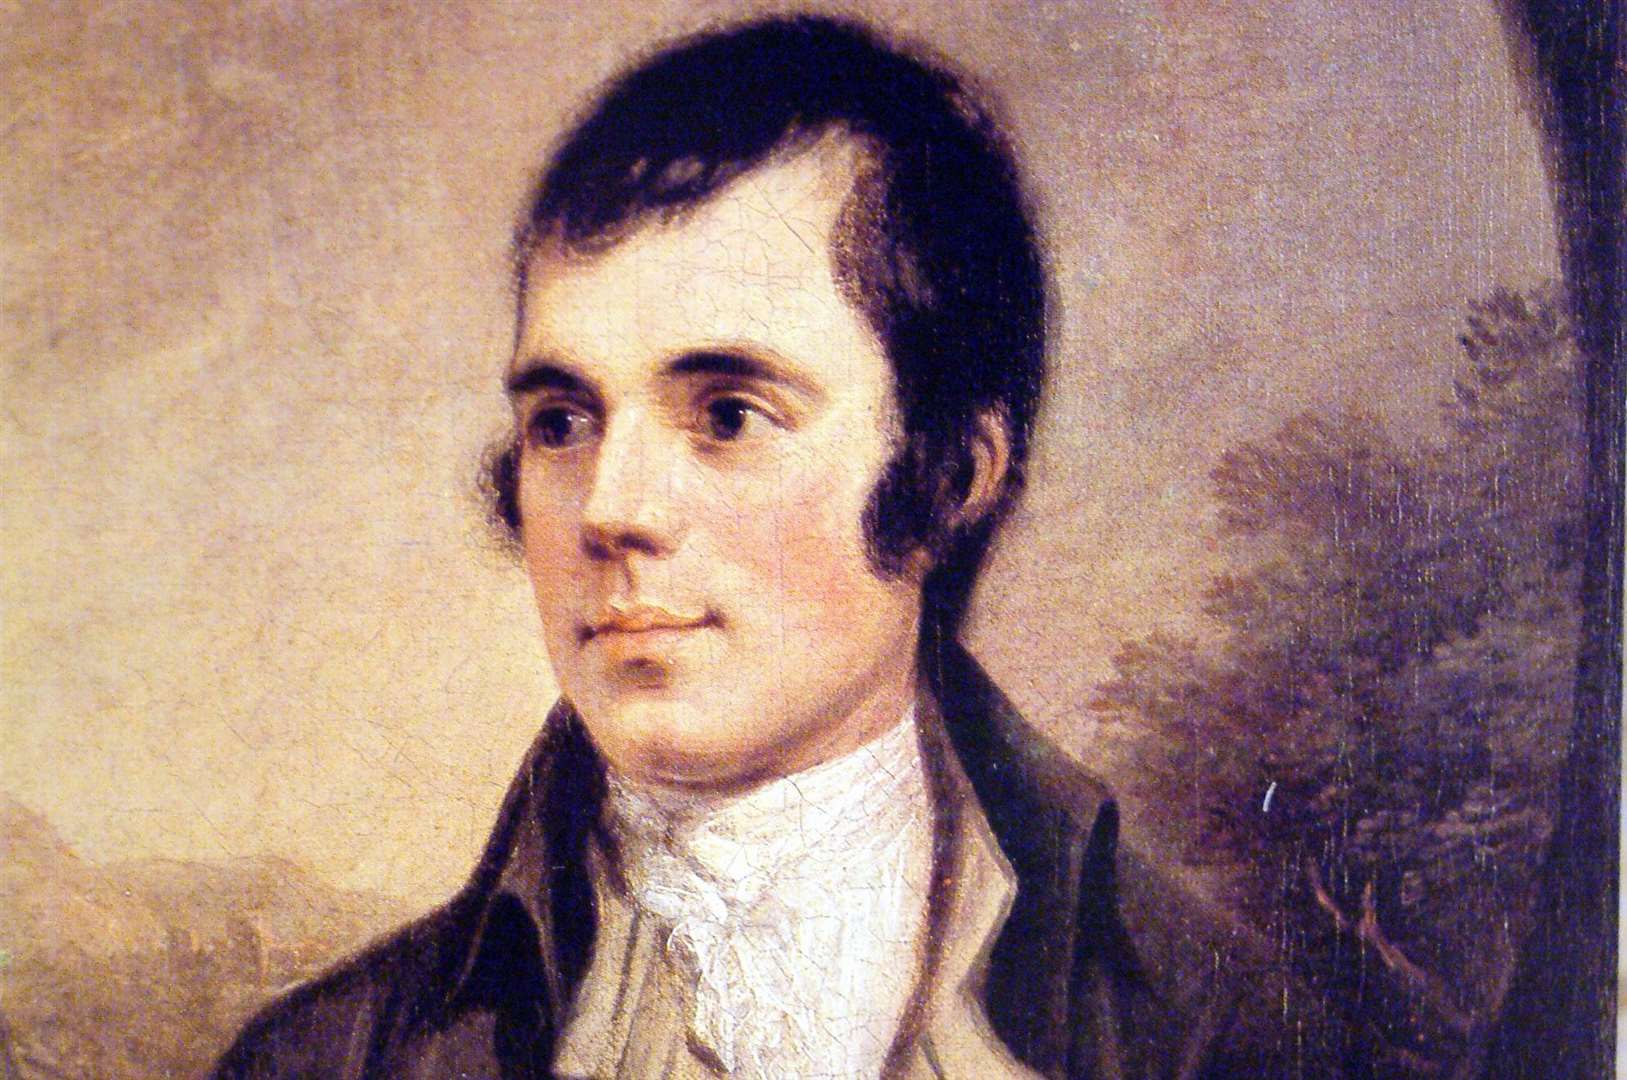 18th century Scottish poet Robert Burns, best known for poems Auld Lang Syne and The Banks of Doon